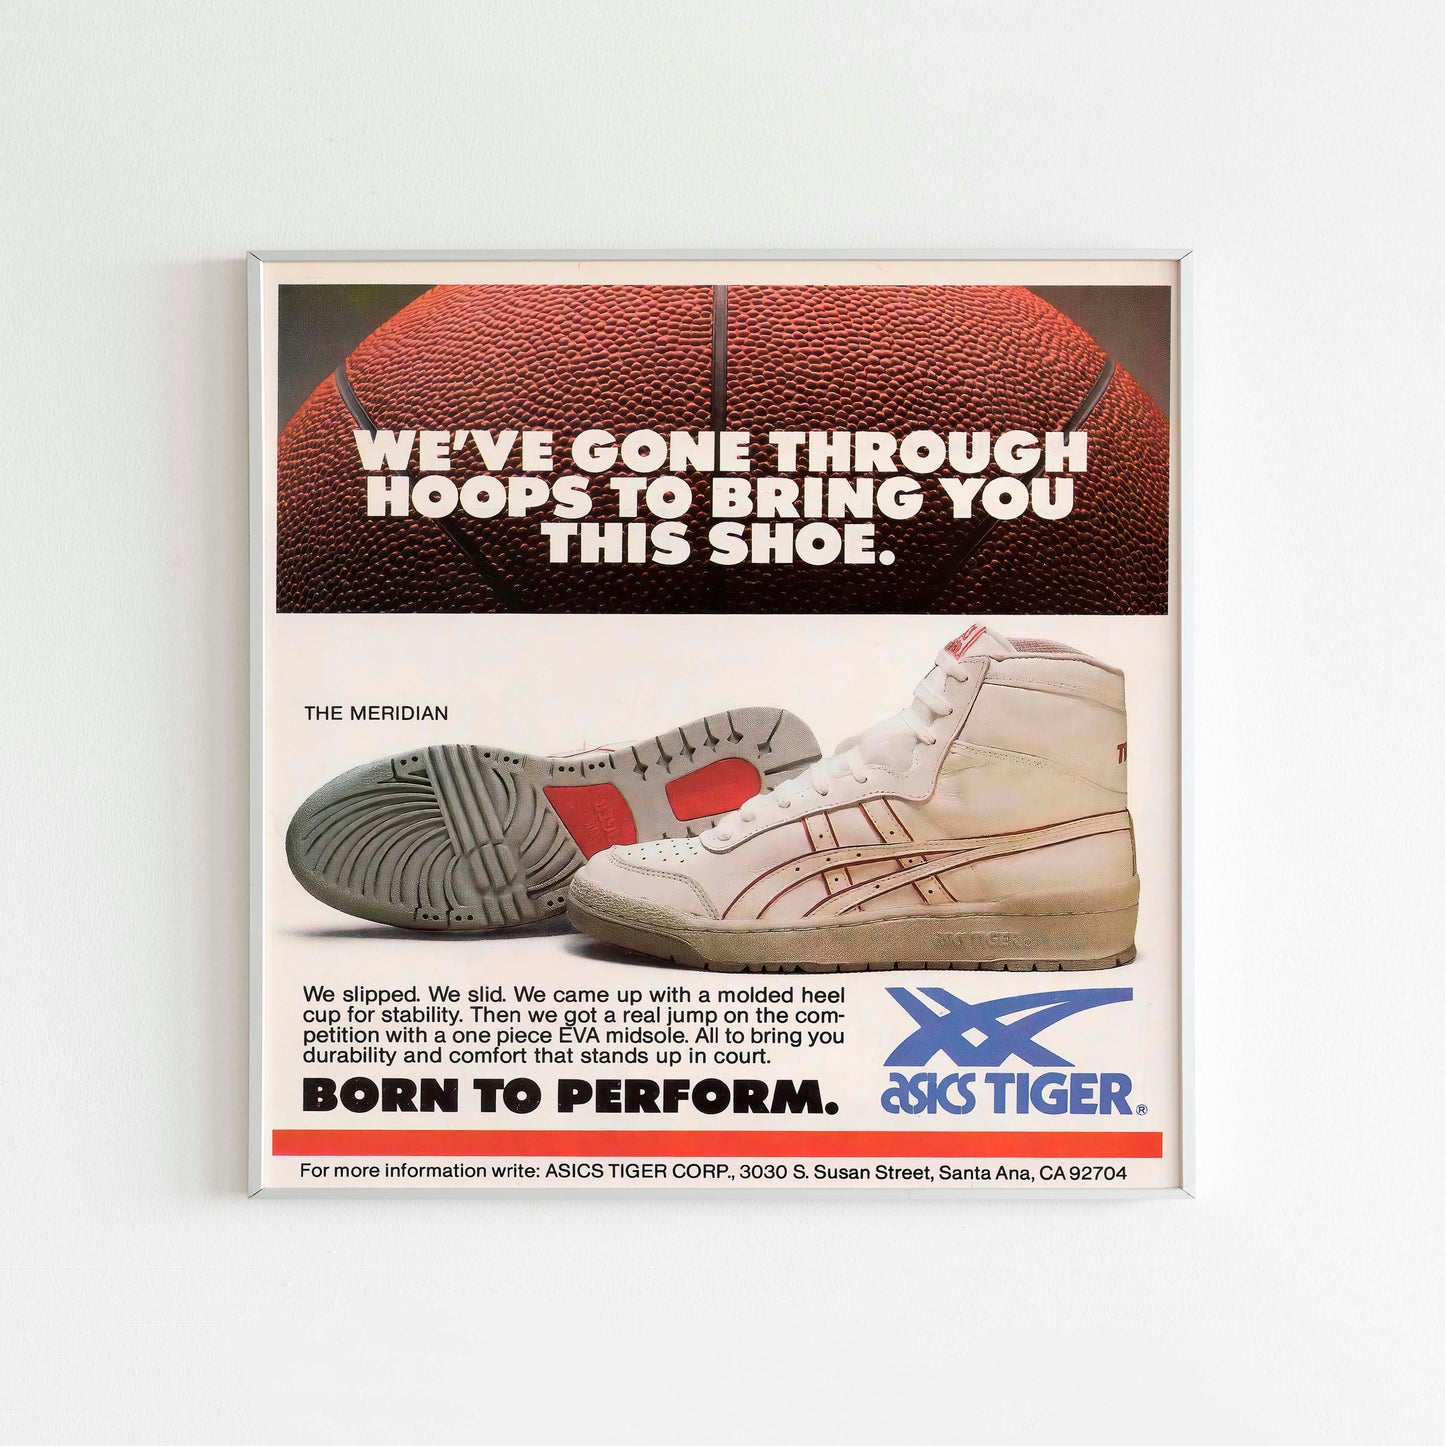 Asics Meridian Basketball Poster Advertising, 90s Style Shoes Print, Vintage Running Ad Wall Art, Magazine Retro Advertisement